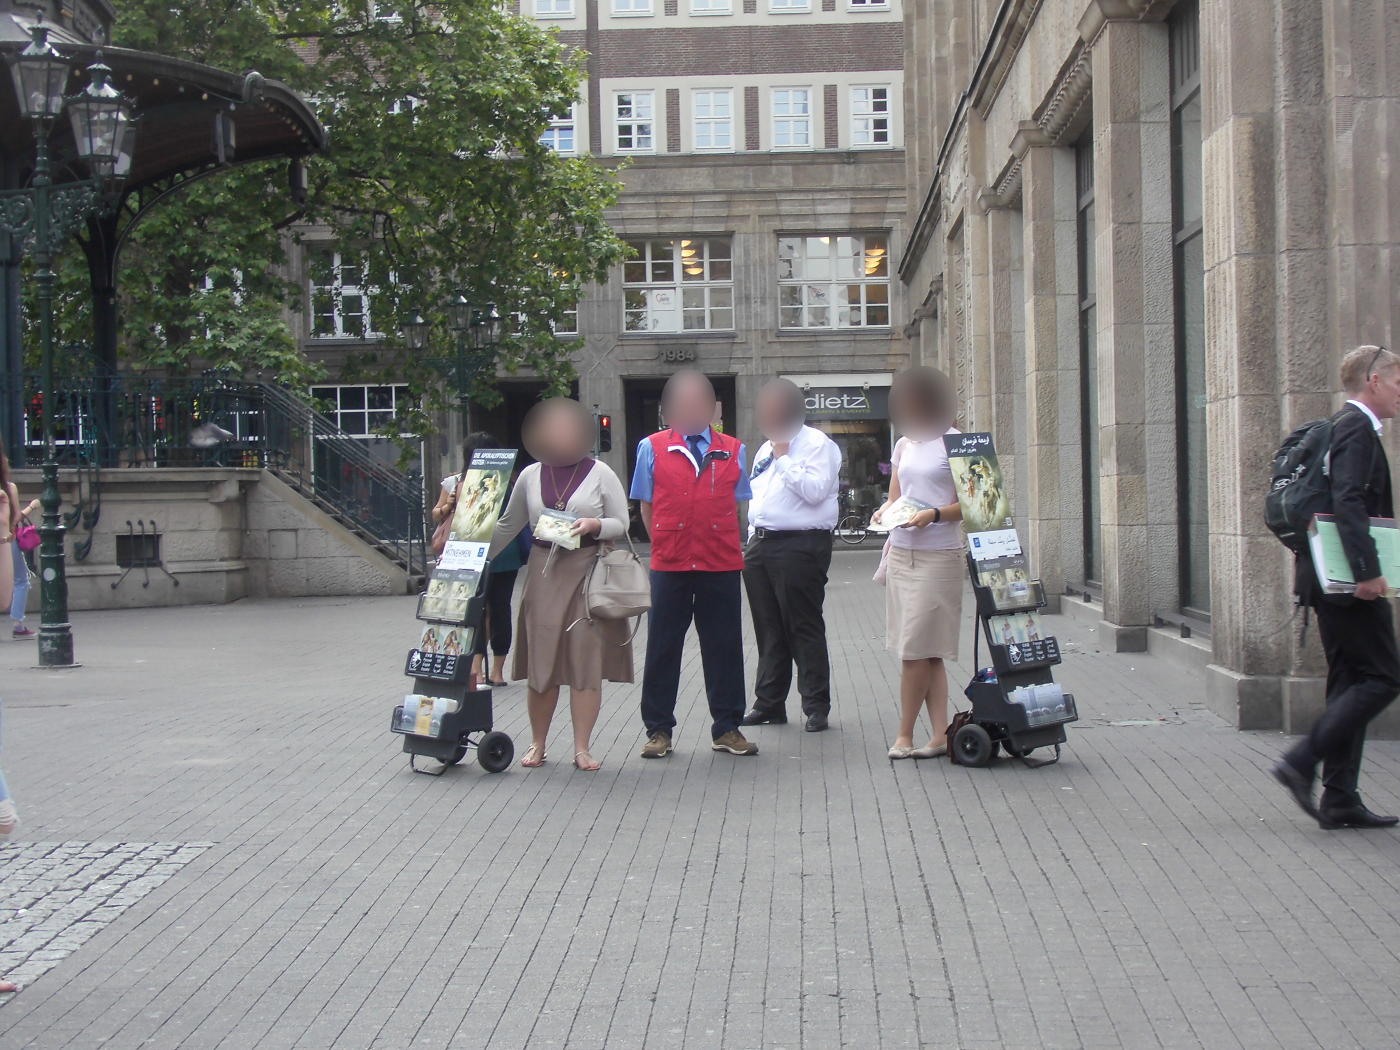 Duesseldorf: Jehovah's Witnesses alarm ... as if they had been prepared